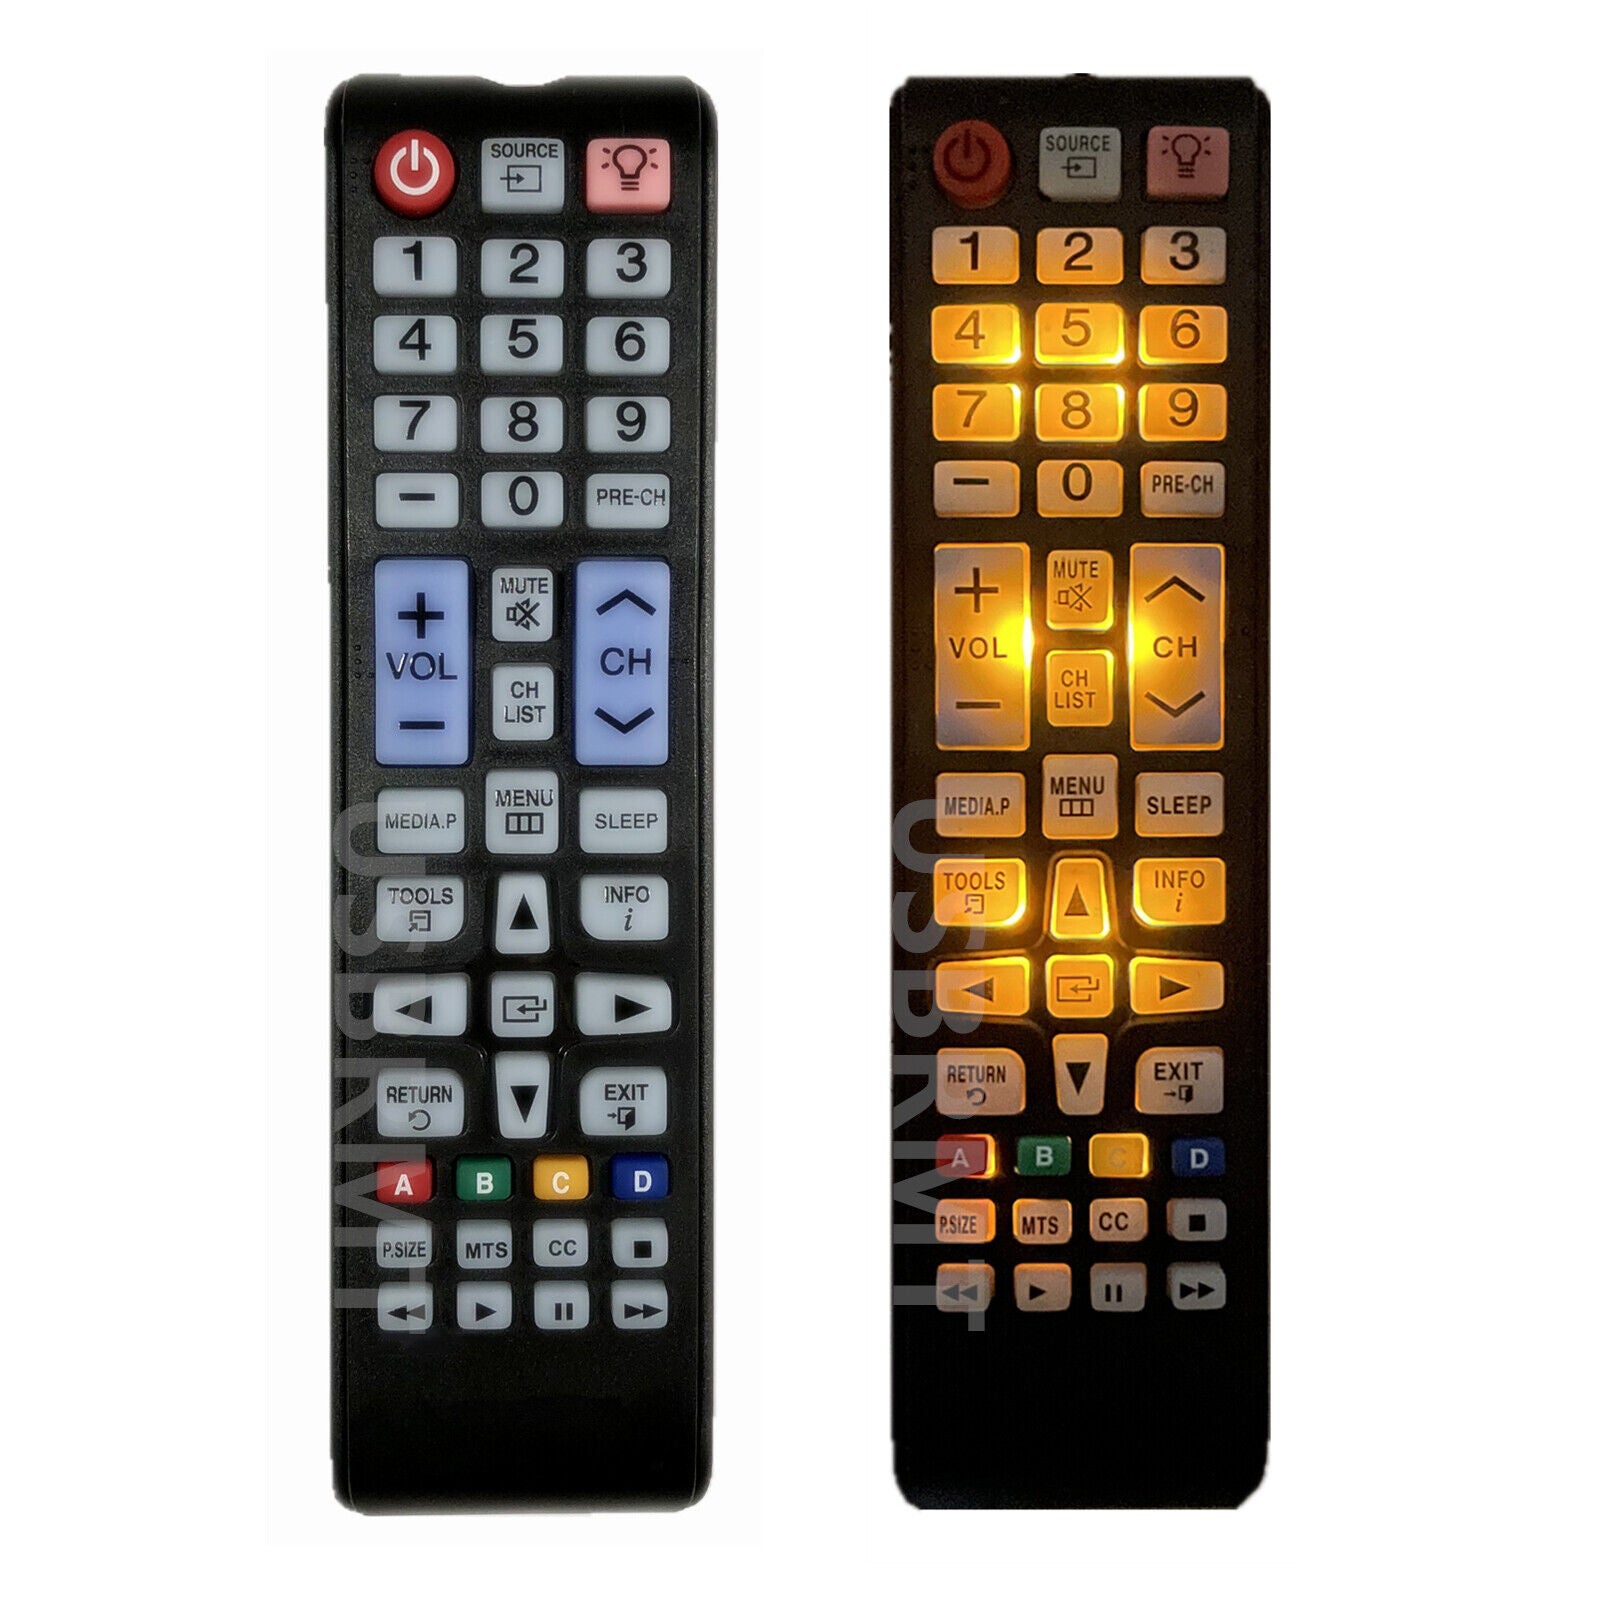 NEW USBRMT TV Remote AA59-00600A with backlight for SAMSUNG Smart LCD LED TV